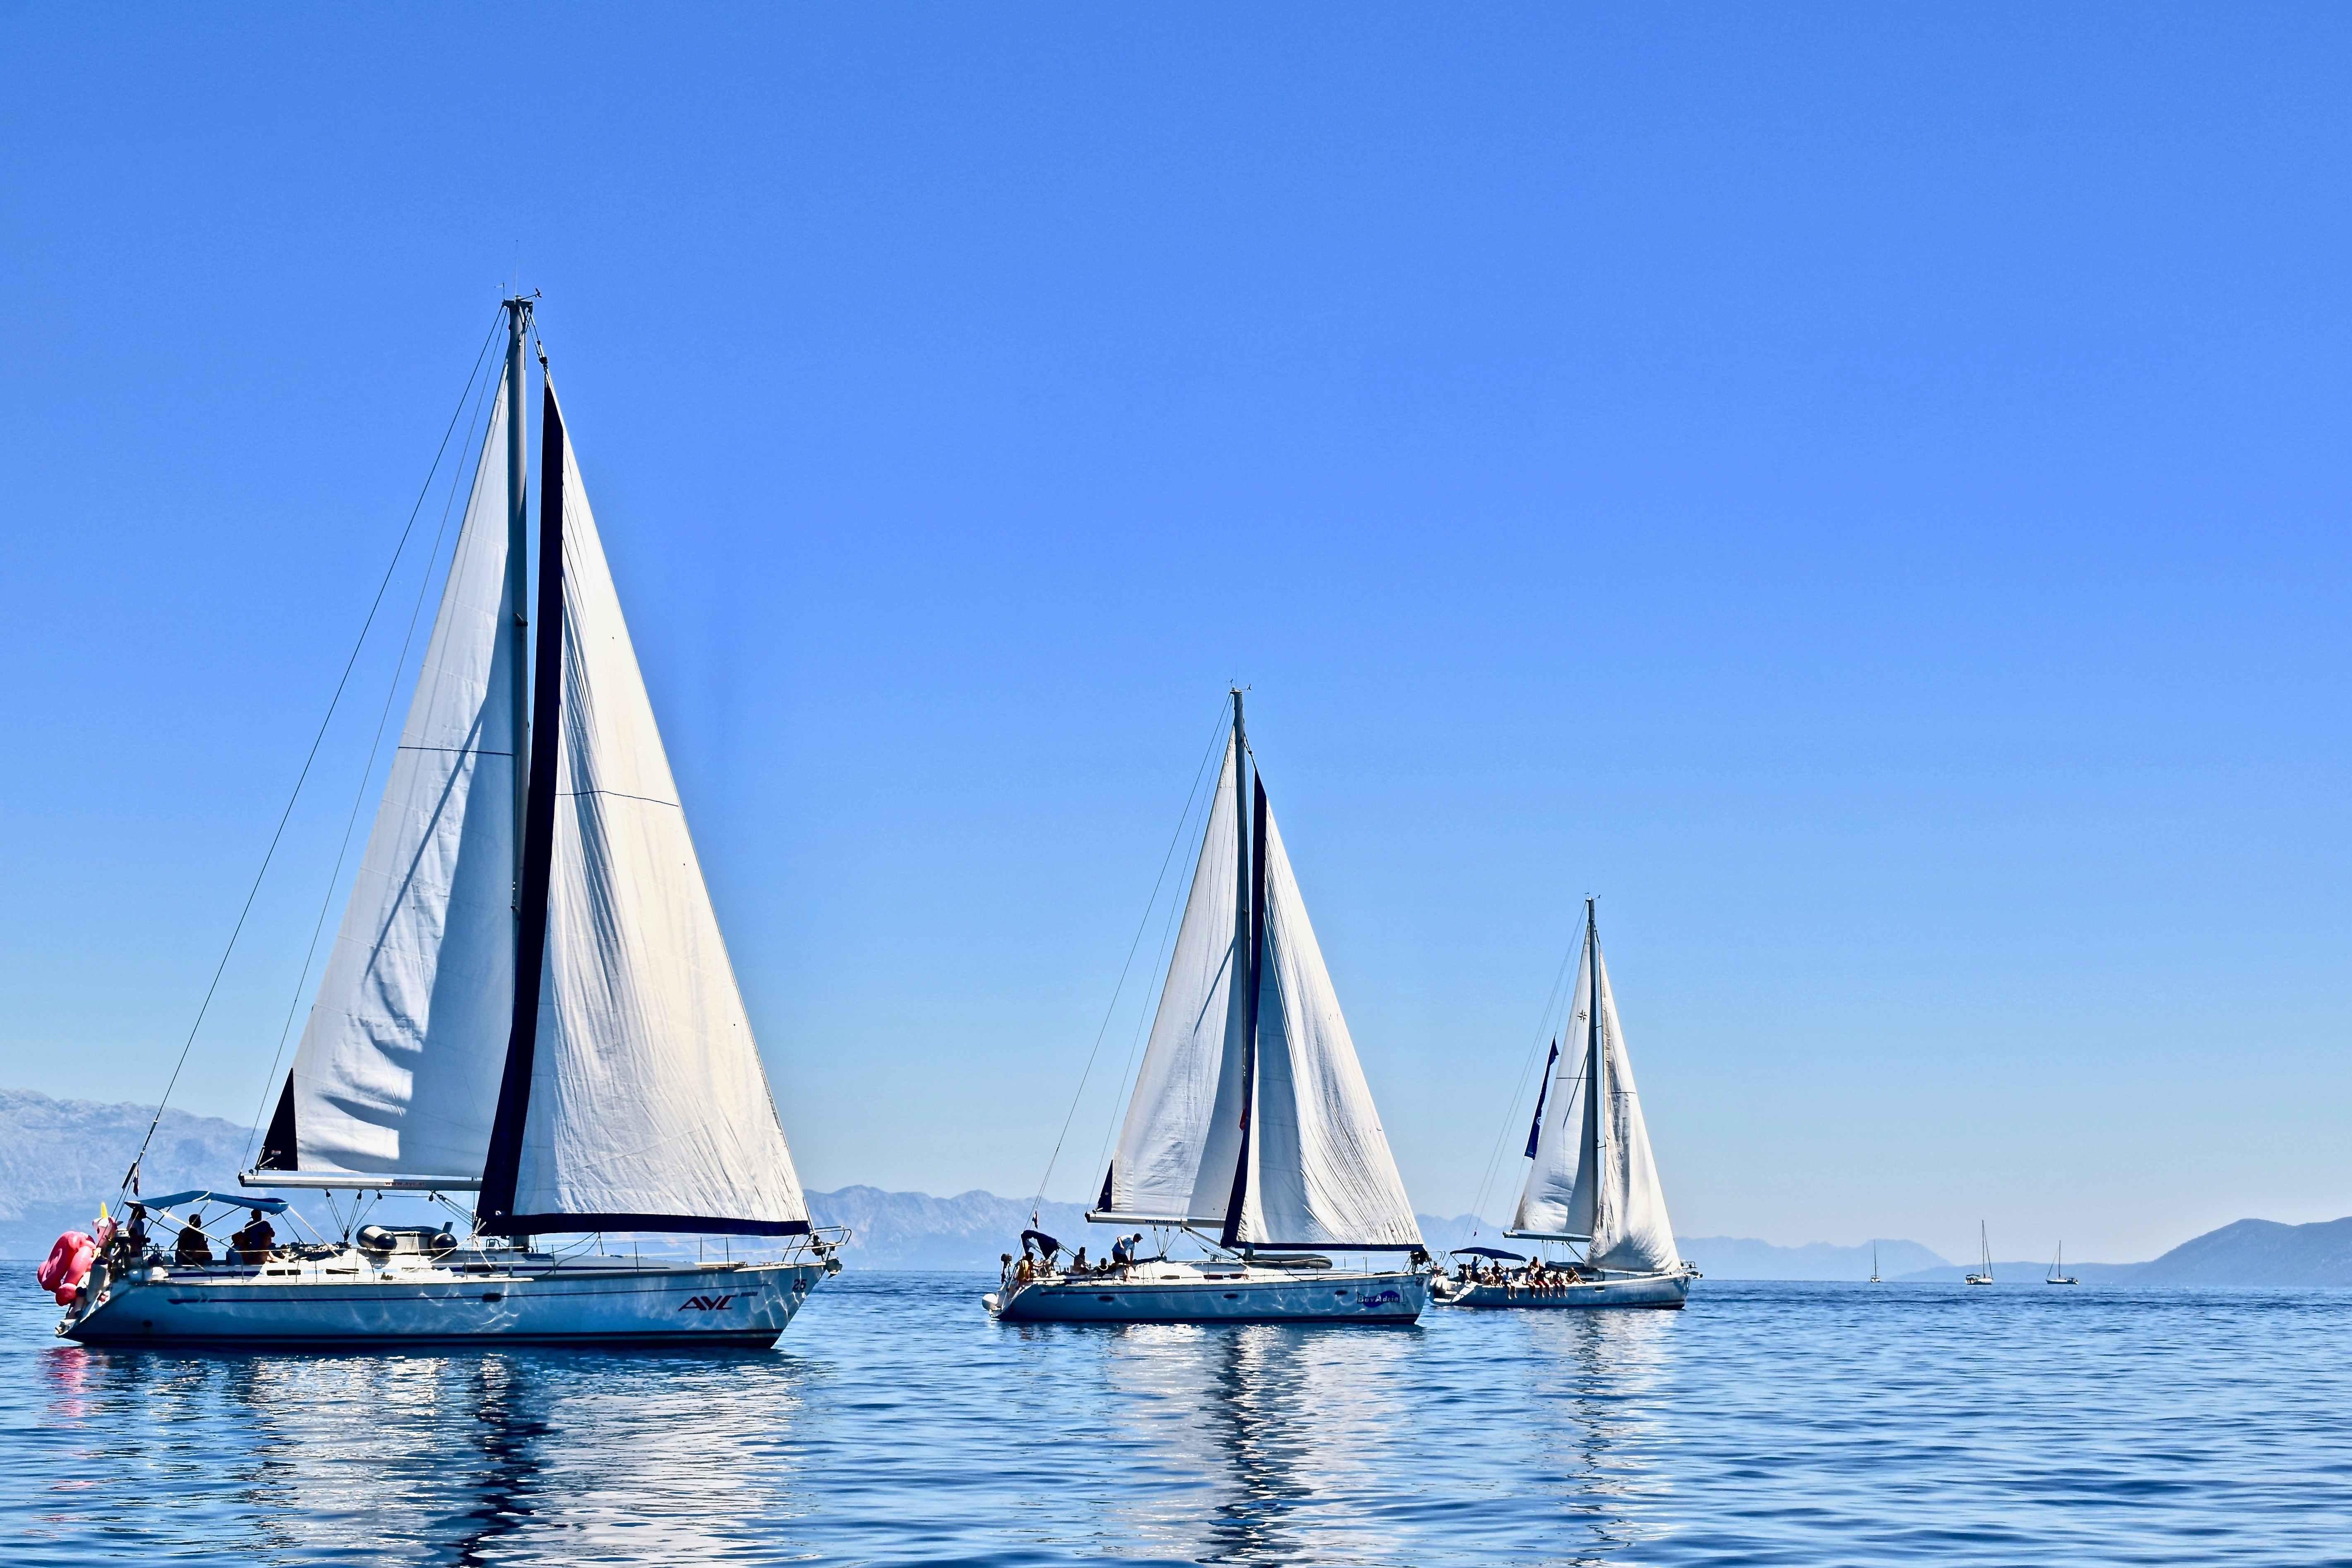 Sailboats - The Pros and Cons | SkiSafe